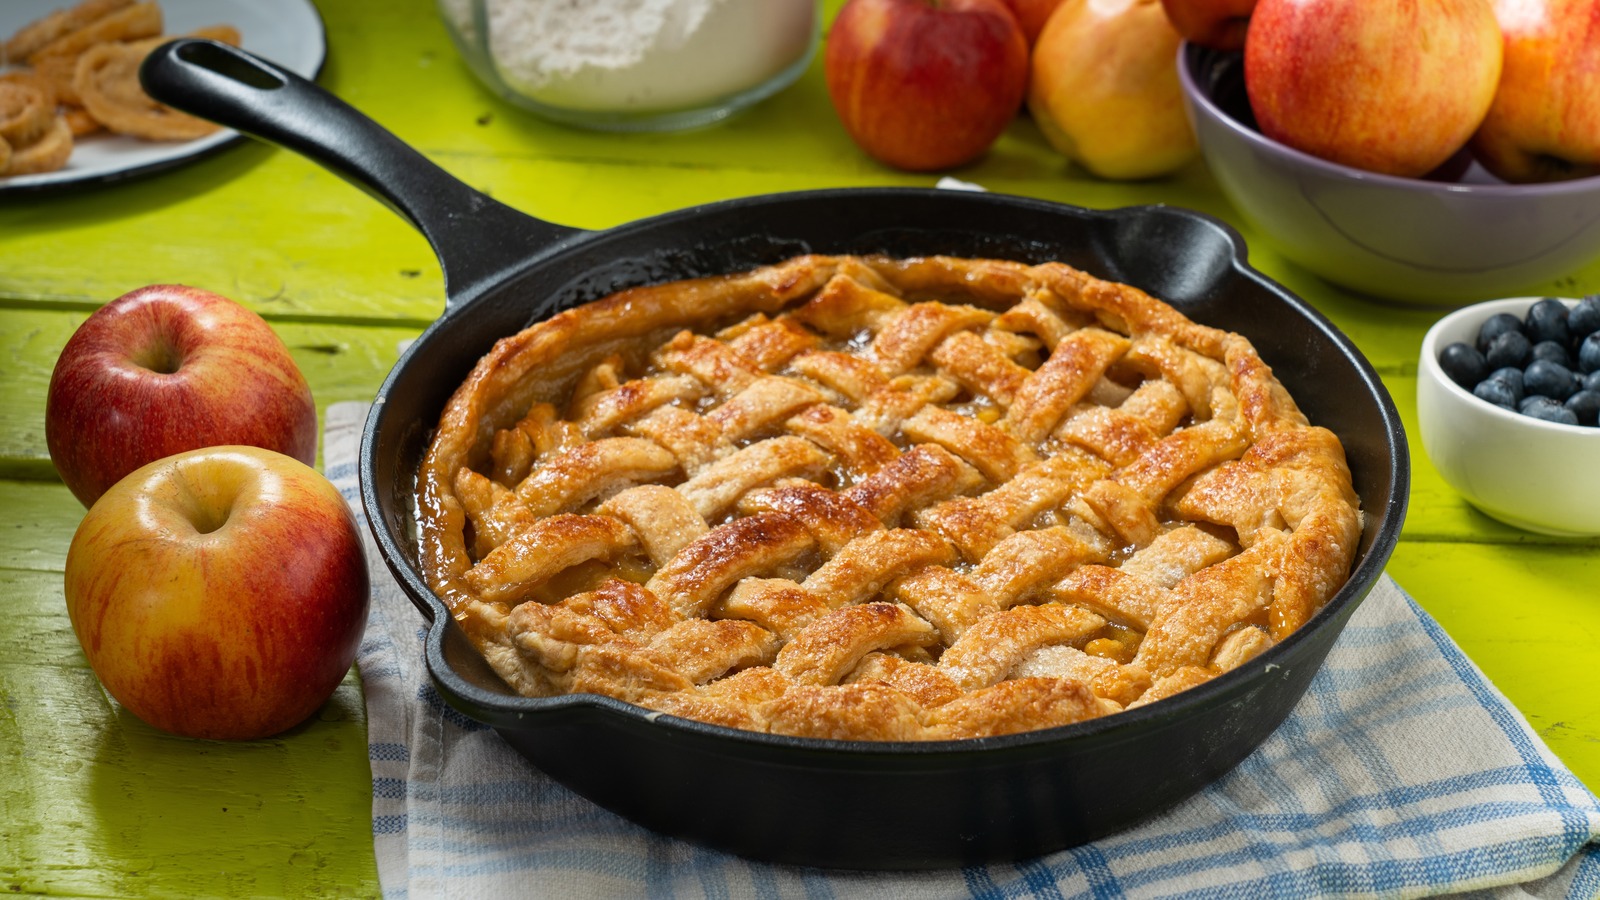 https://www.thedailymeal.com/img/gallery/should-you-make-pie-in-a-cast-iron-skillet/l-intro-1669297958.jpg